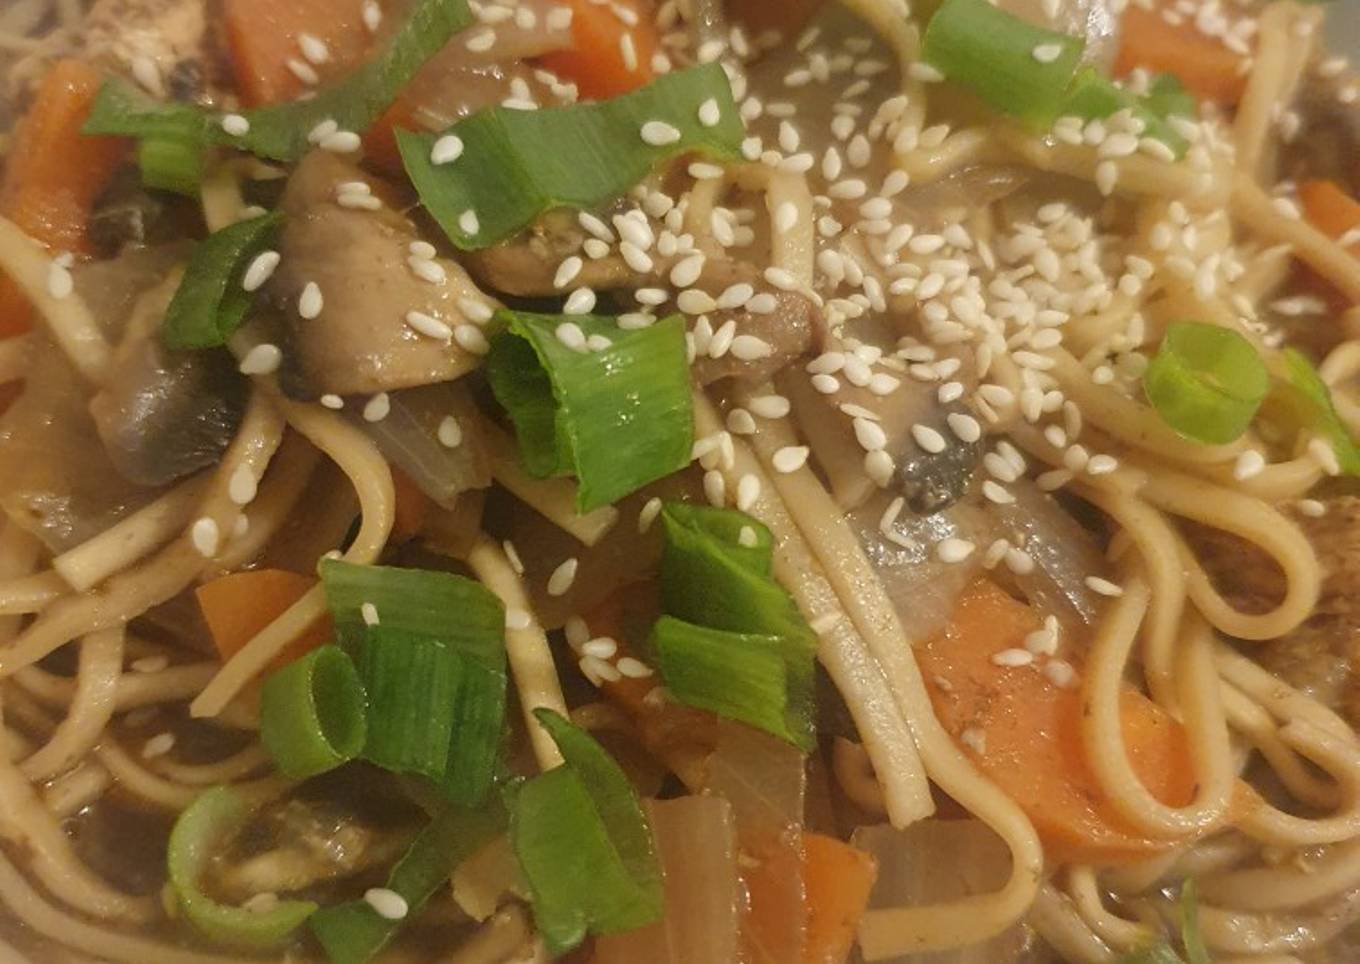 Chicken and Vegetable Noodles